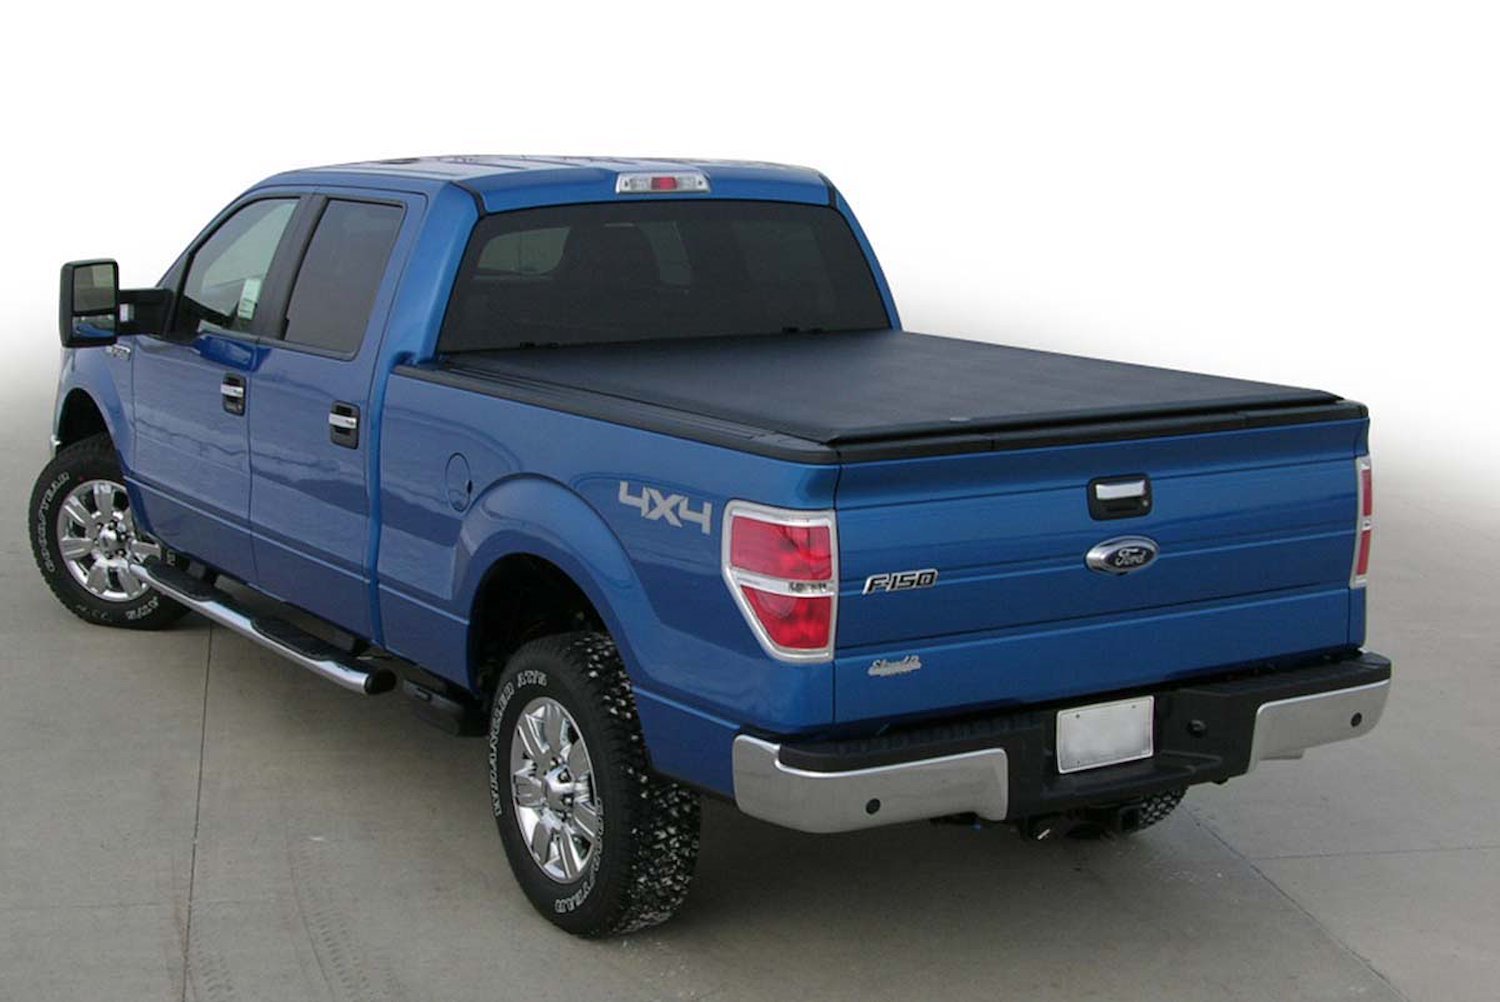 LORADO Roll-Up Tonneau Cover, Fits Select Ford F-150, with 5 ft. 6 in. Bed